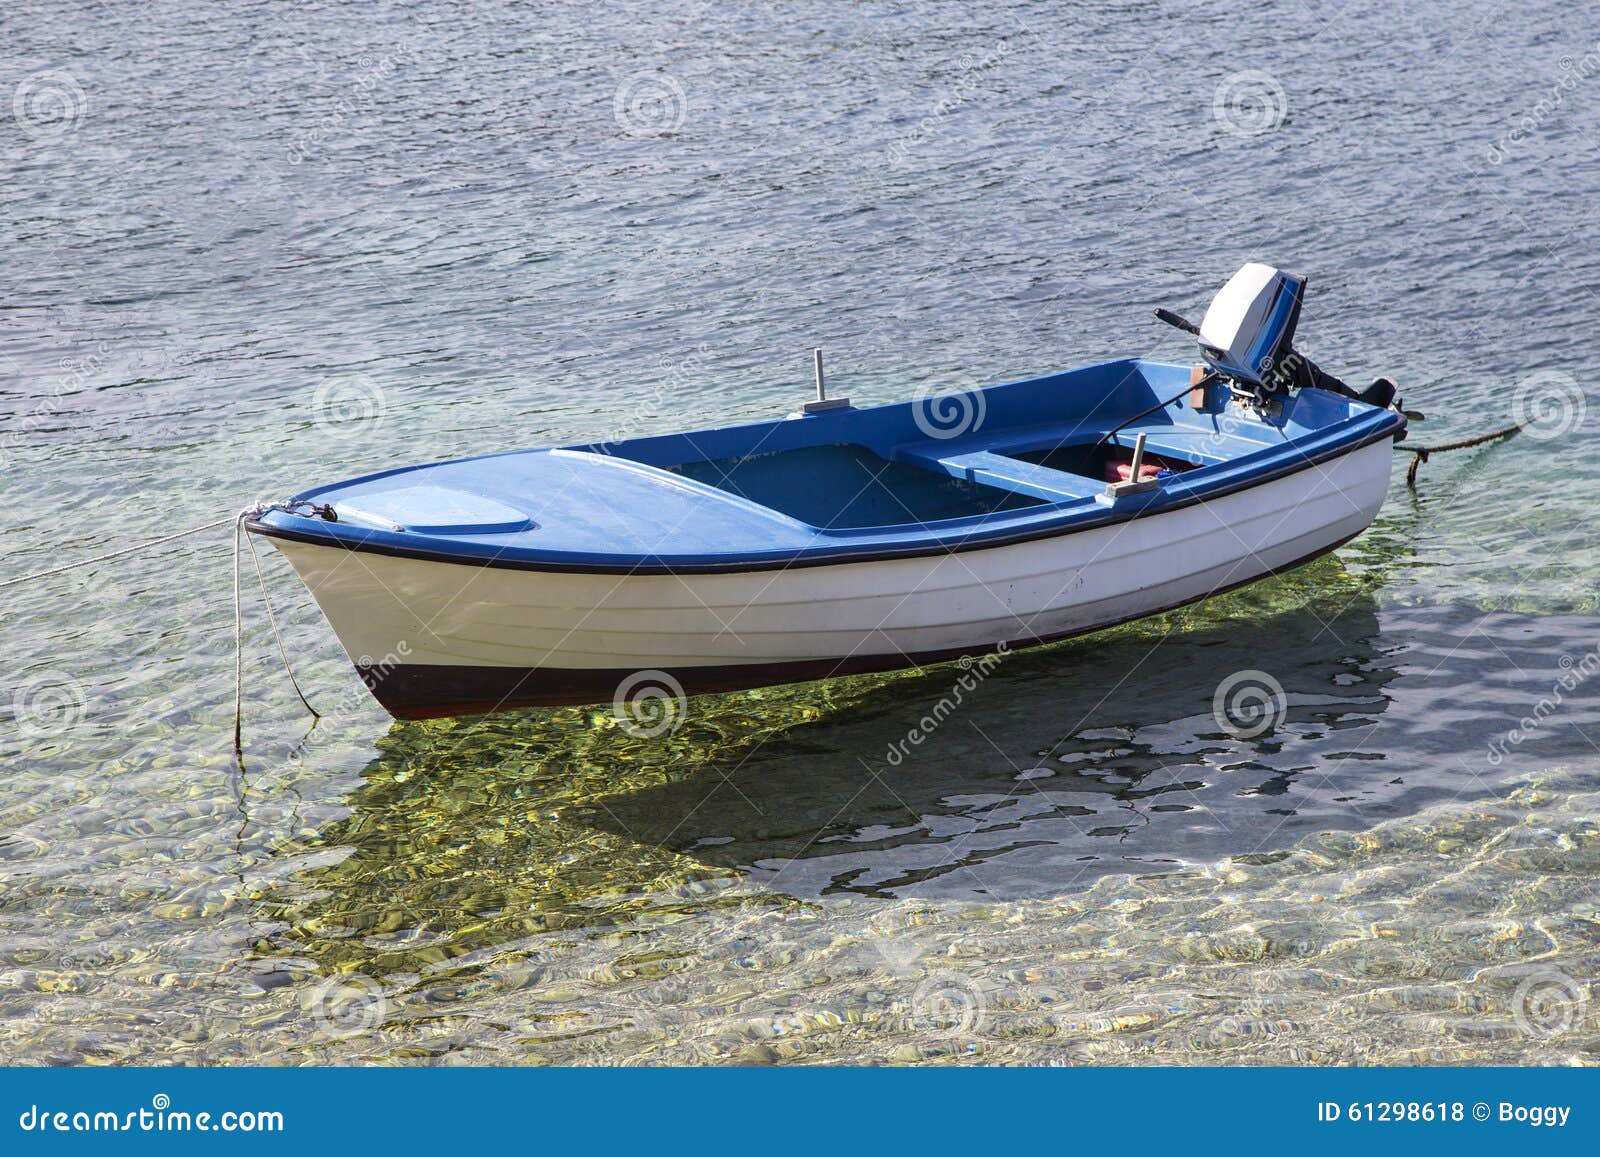 Small Fishing Boat on the Sea in a Summer Day Stock Photo - Image